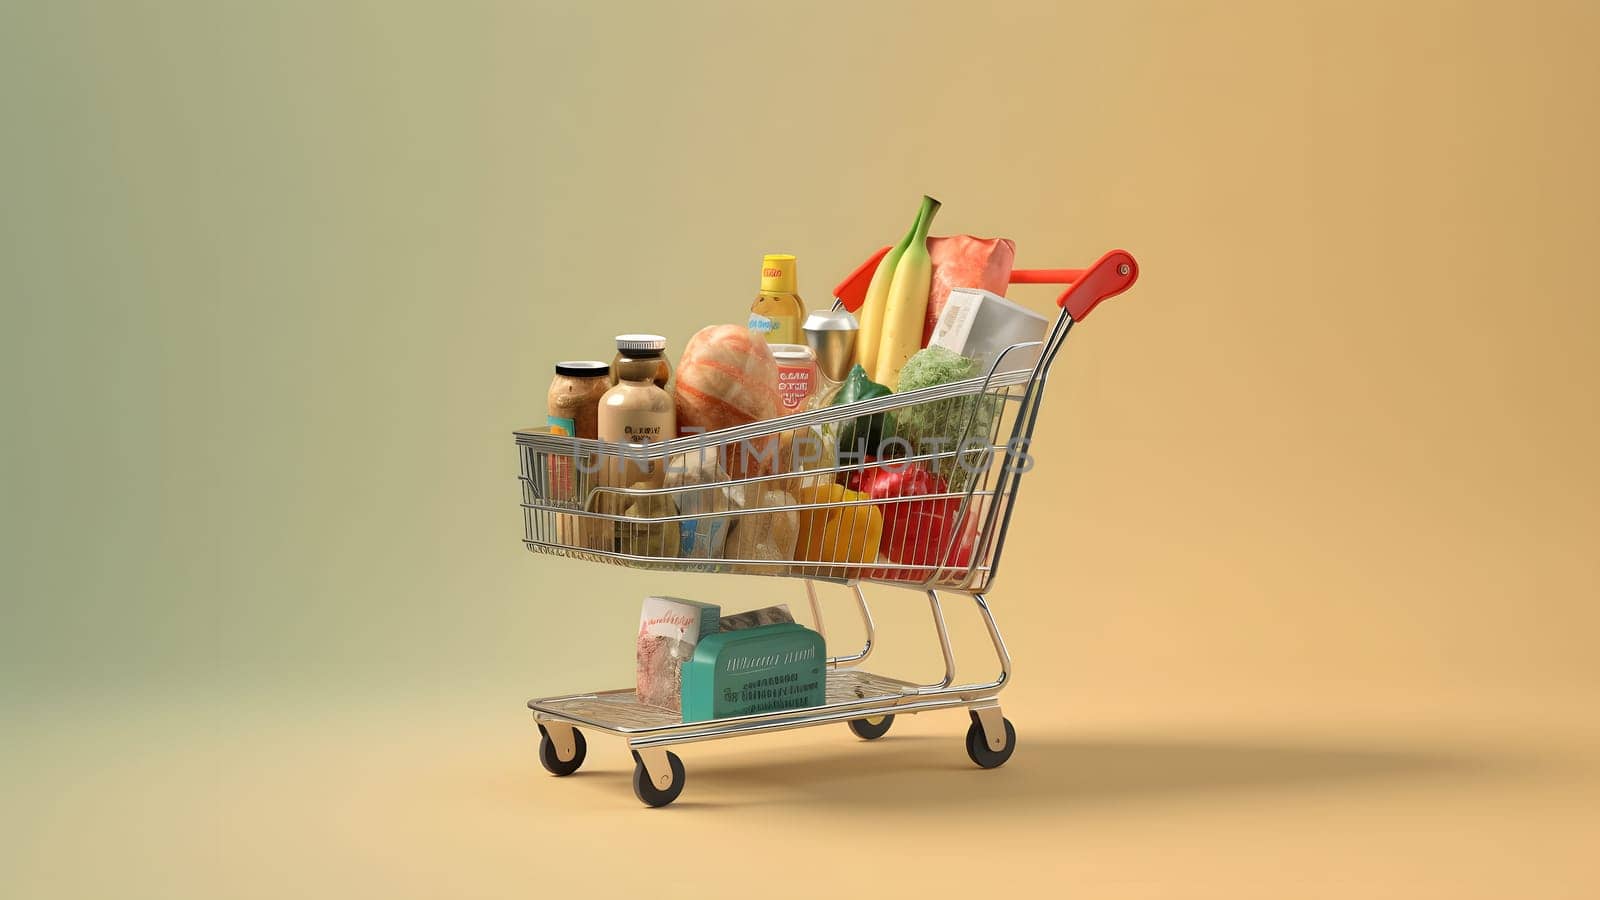 toy supermarket cart filled with products on yellow background. Neural network generated in May 2023. Not based on any actual person, scene or pattern.